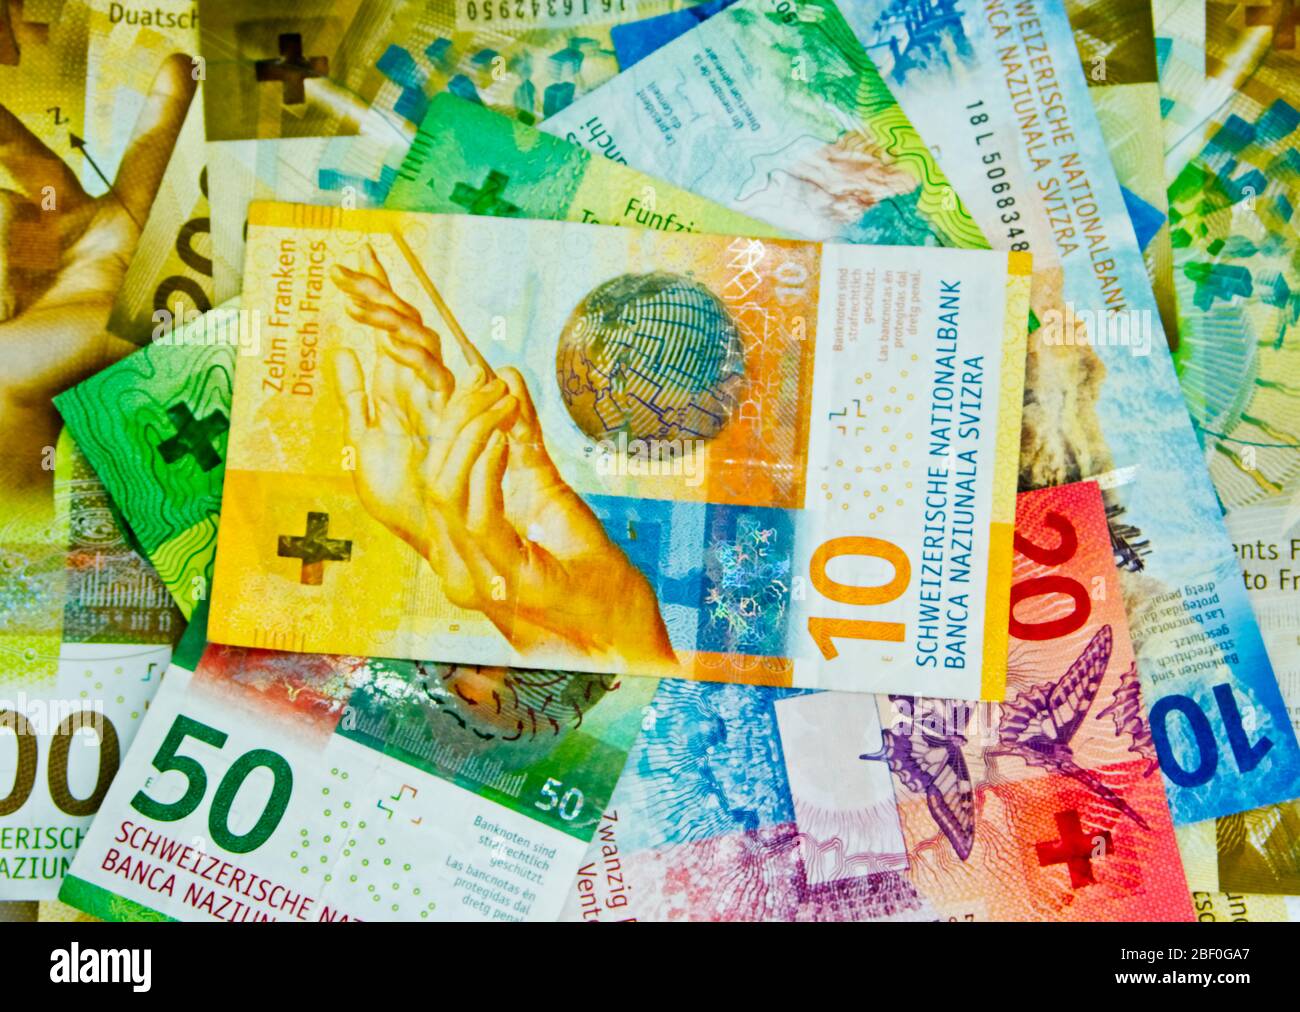 swiss-money-and-currency-of-switzerland-swiss-francs-money-in